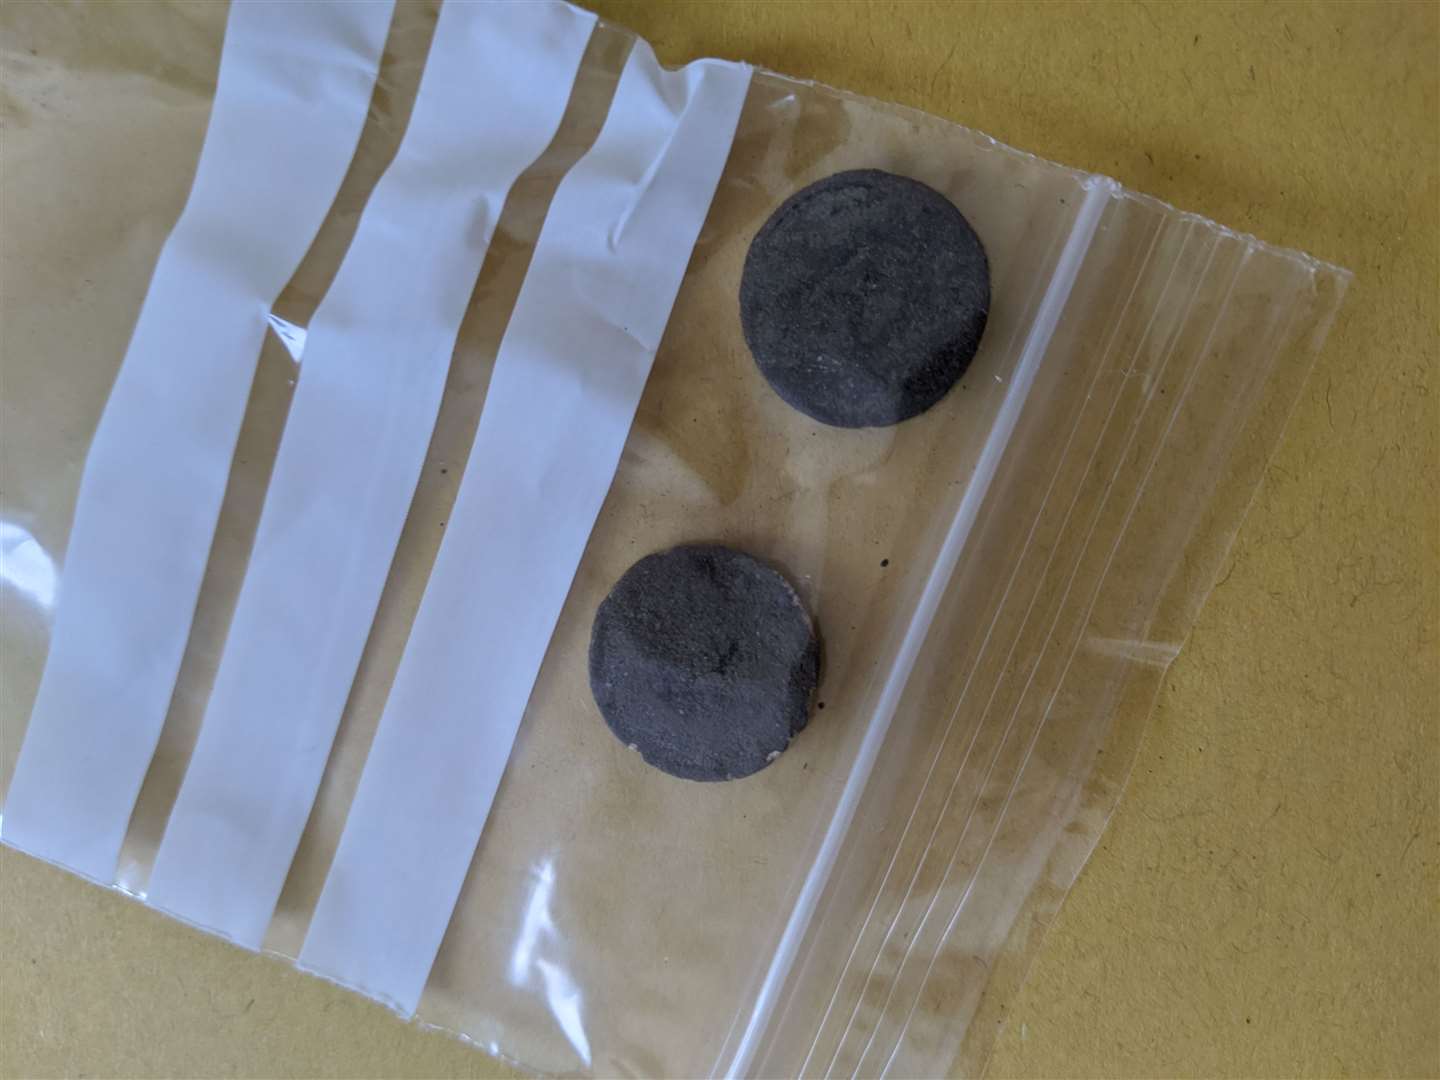 The coins are now bagged for the experts to look at